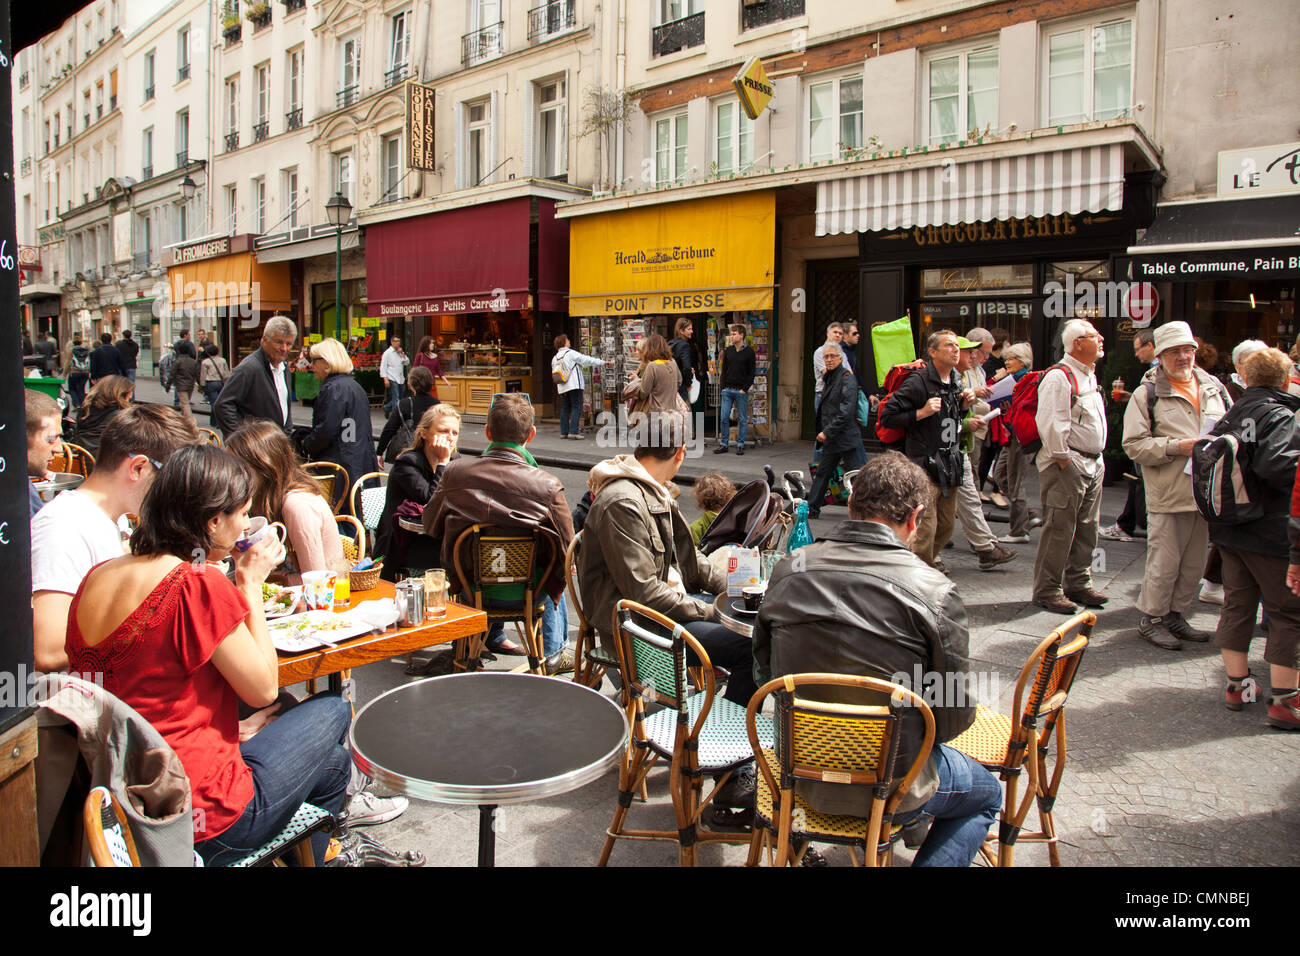 Cafe and diners in rue Montorgueil in Paris France Stock Photo